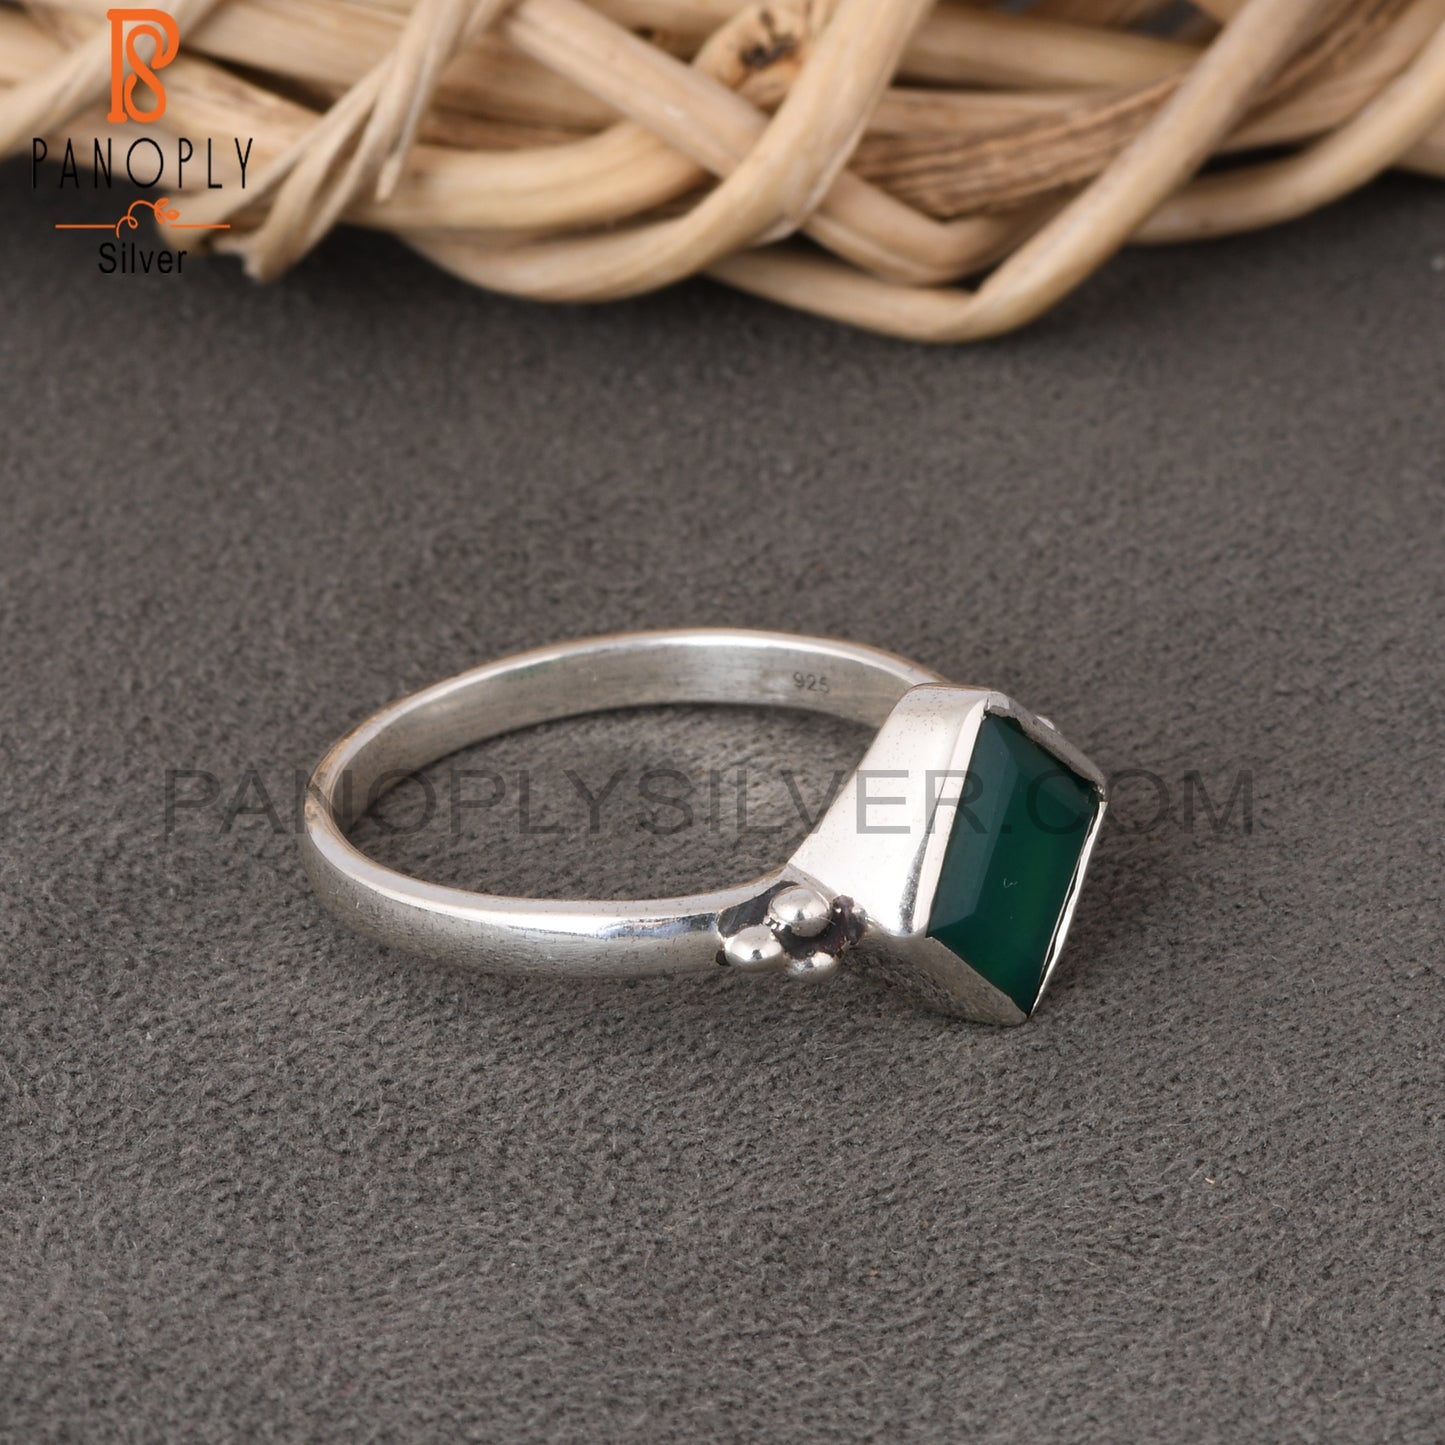 Green Onyx Square Shape 925 Sterling Silver Ring